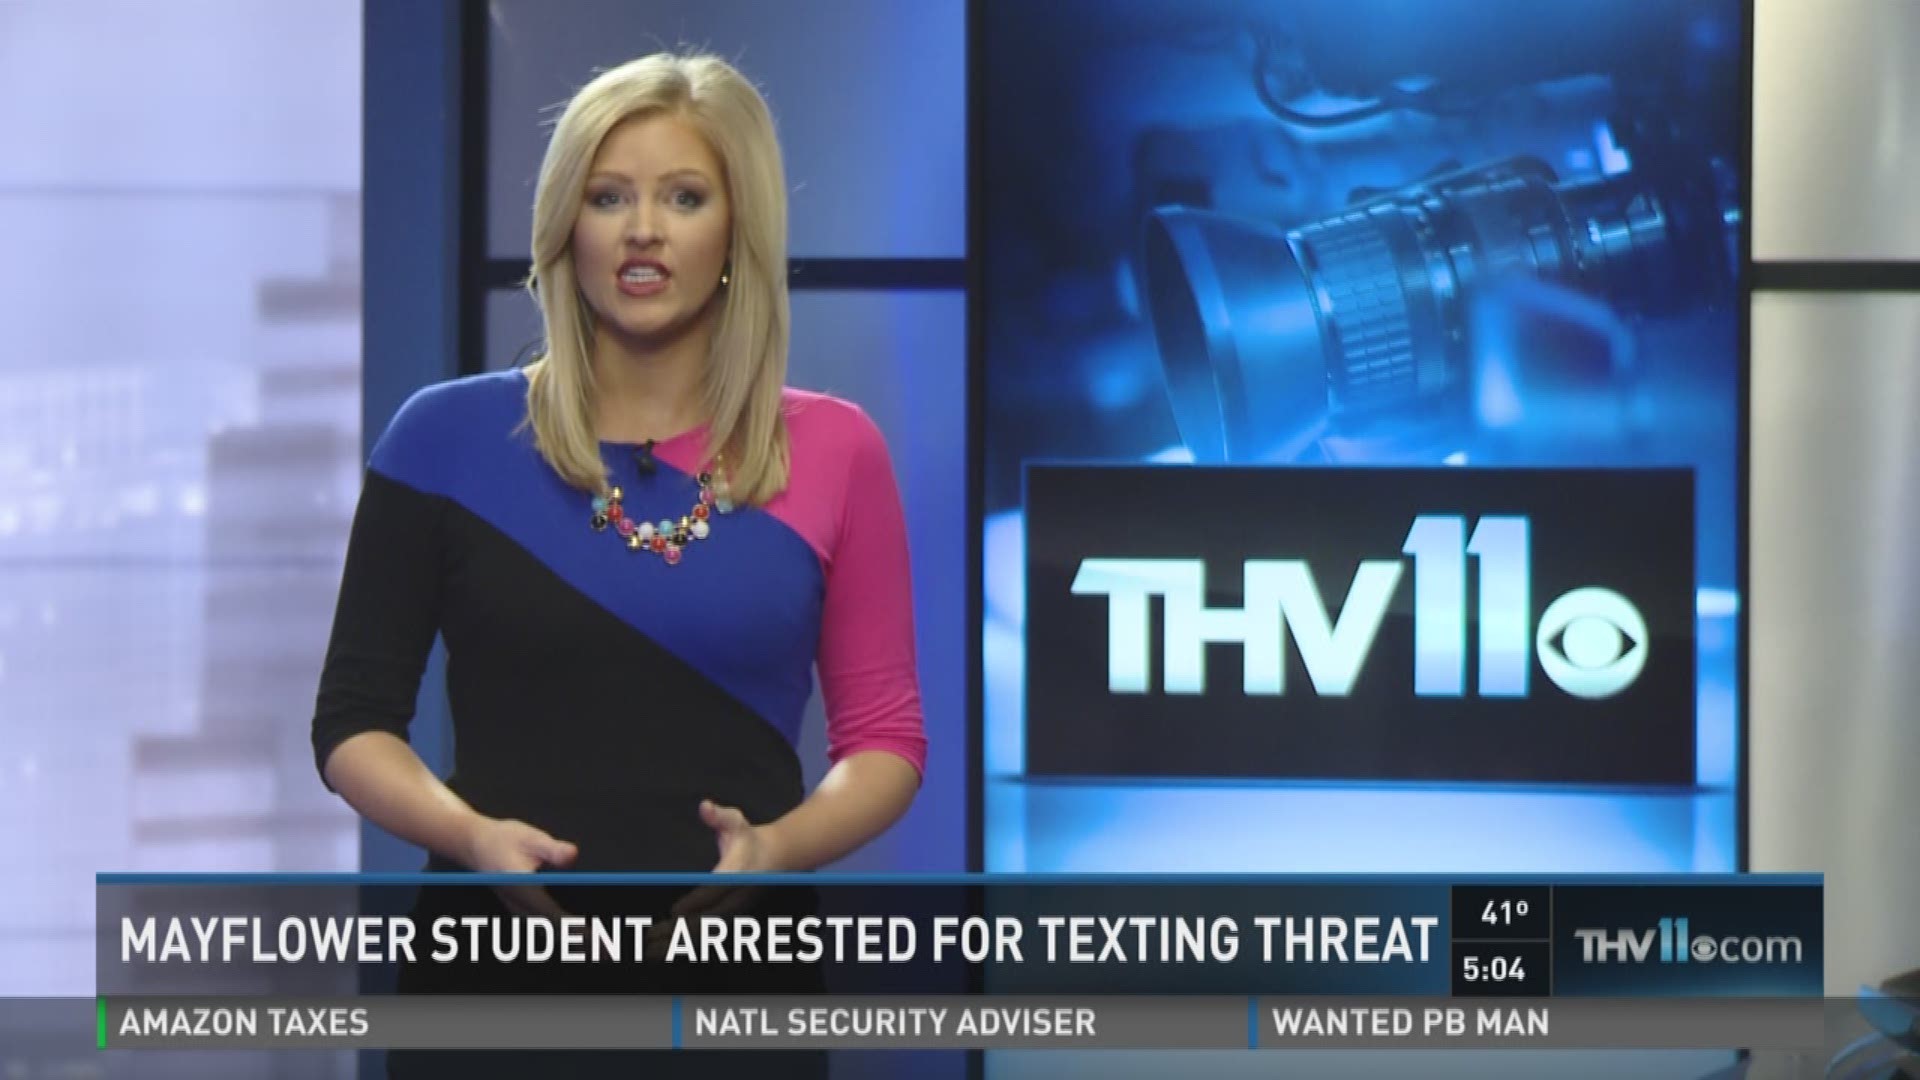 Mayflower student arrested for texting threat